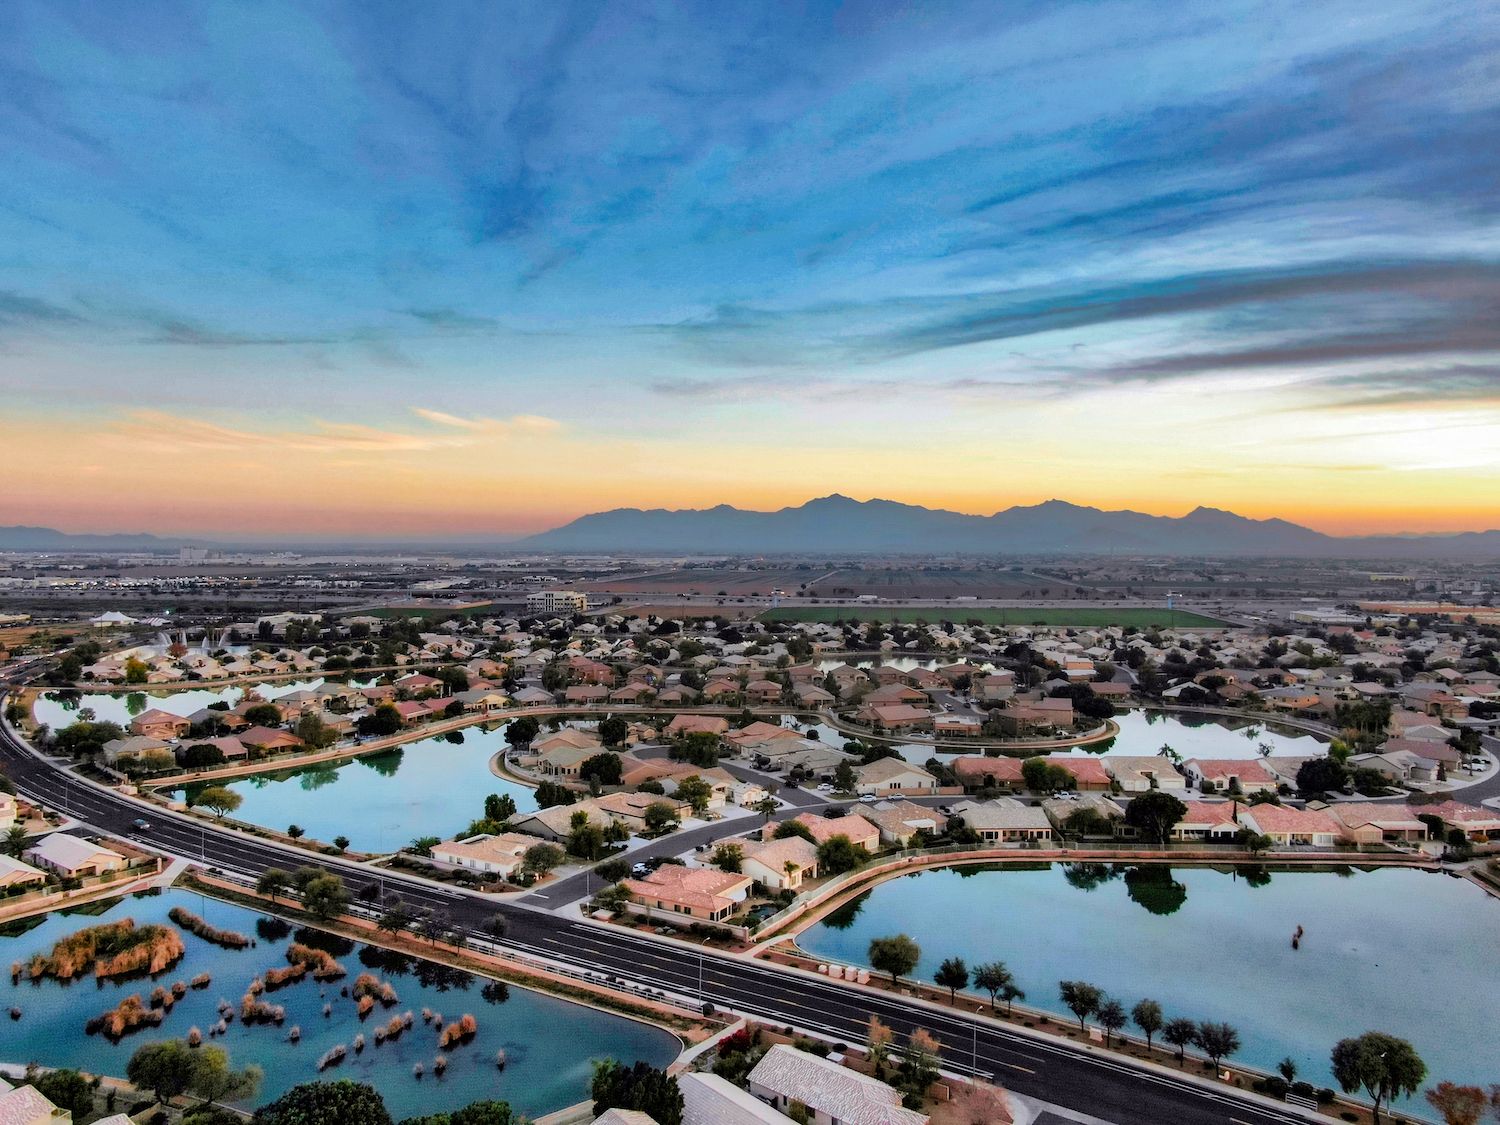 12-facts-about-local-wildlife-and-natural-reserves-in-avondale-arizona